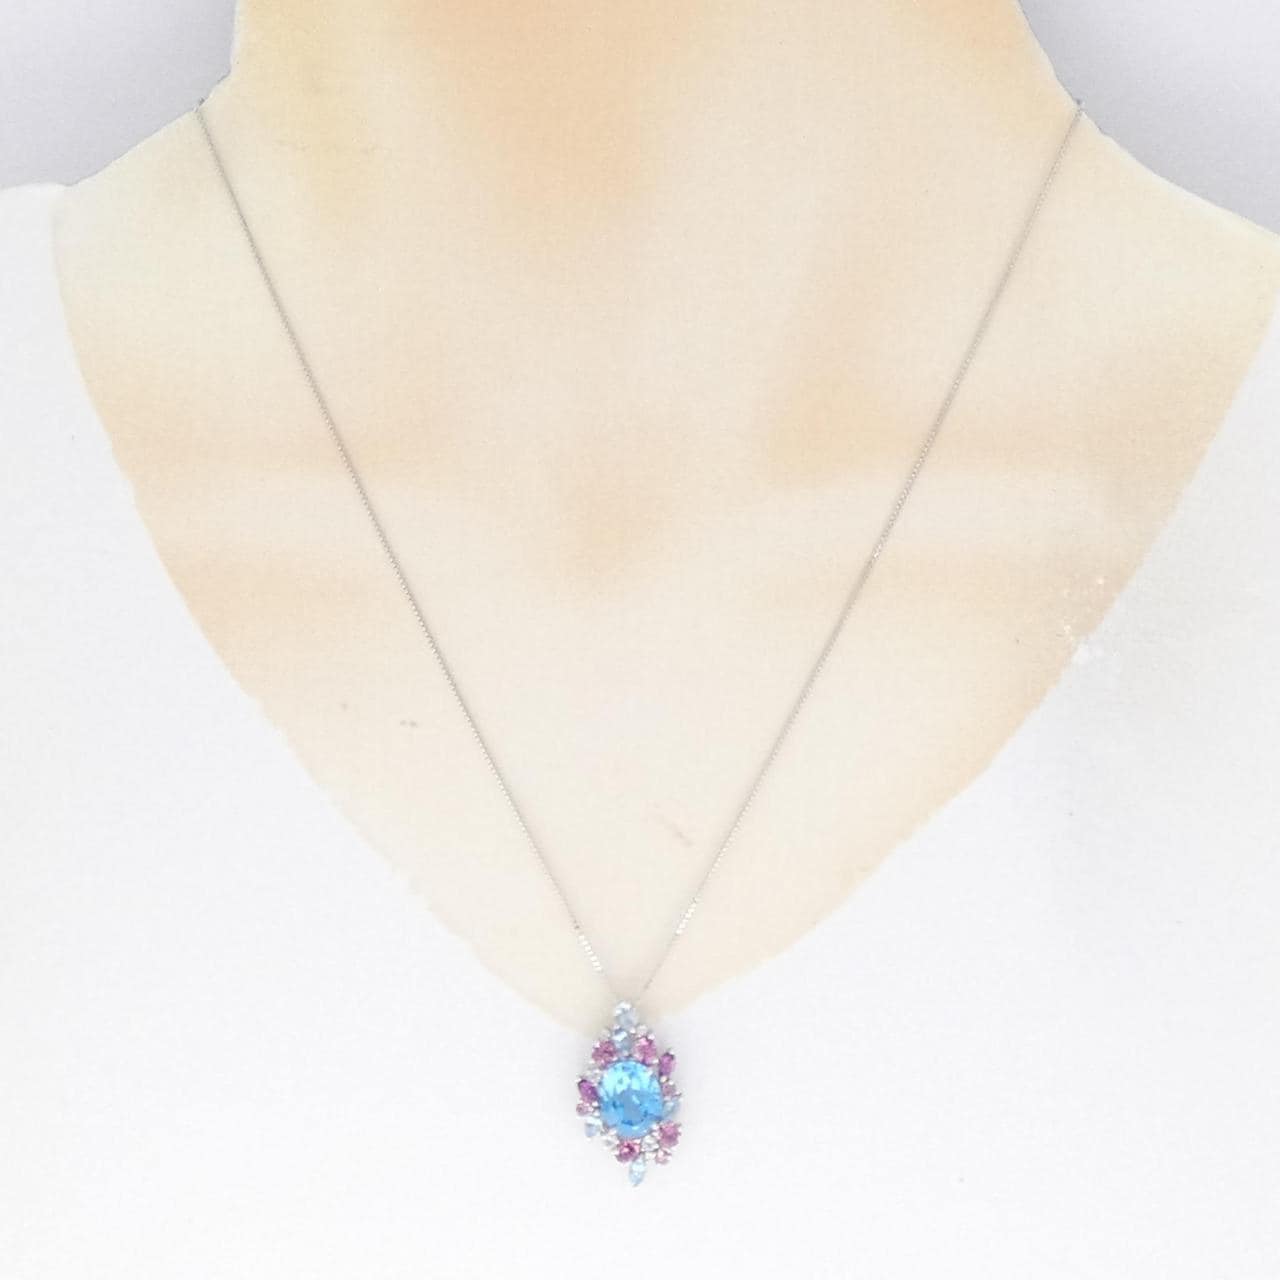 K18WG colored stone necklace